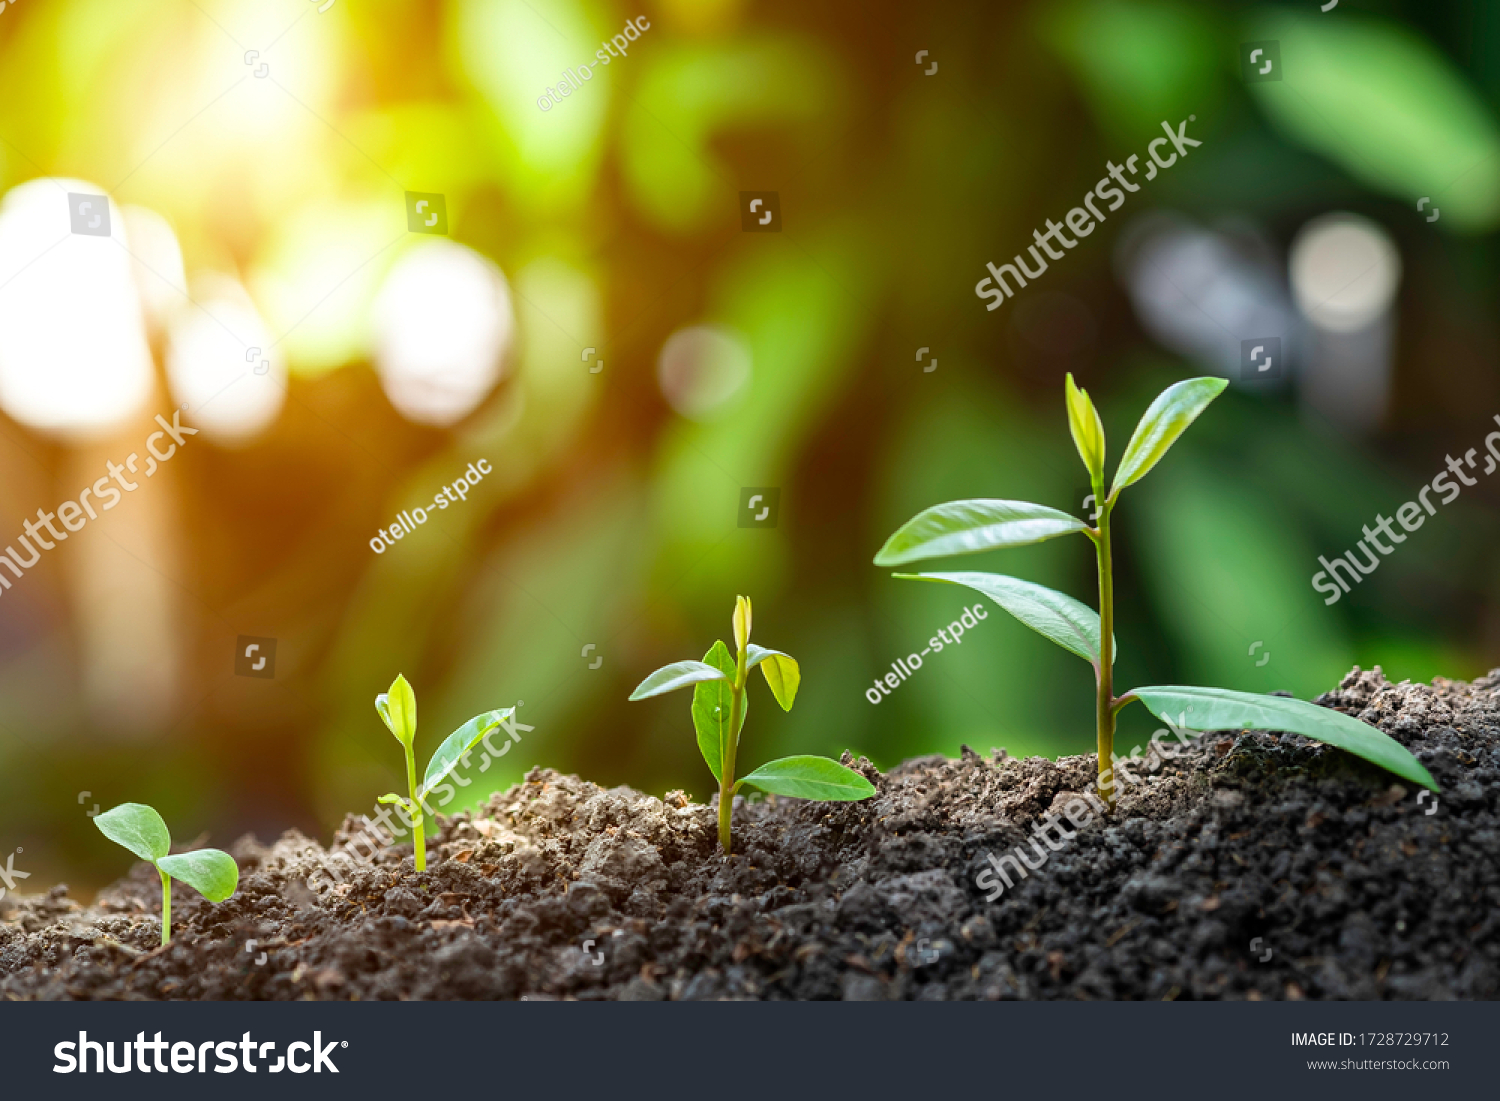 Agriculture and plant grow sequence with morning sunlight and dark green blur background. Germinating seedling grow step sprout growing from seed. Nature ecology and growth concept with copy space. #1728729712